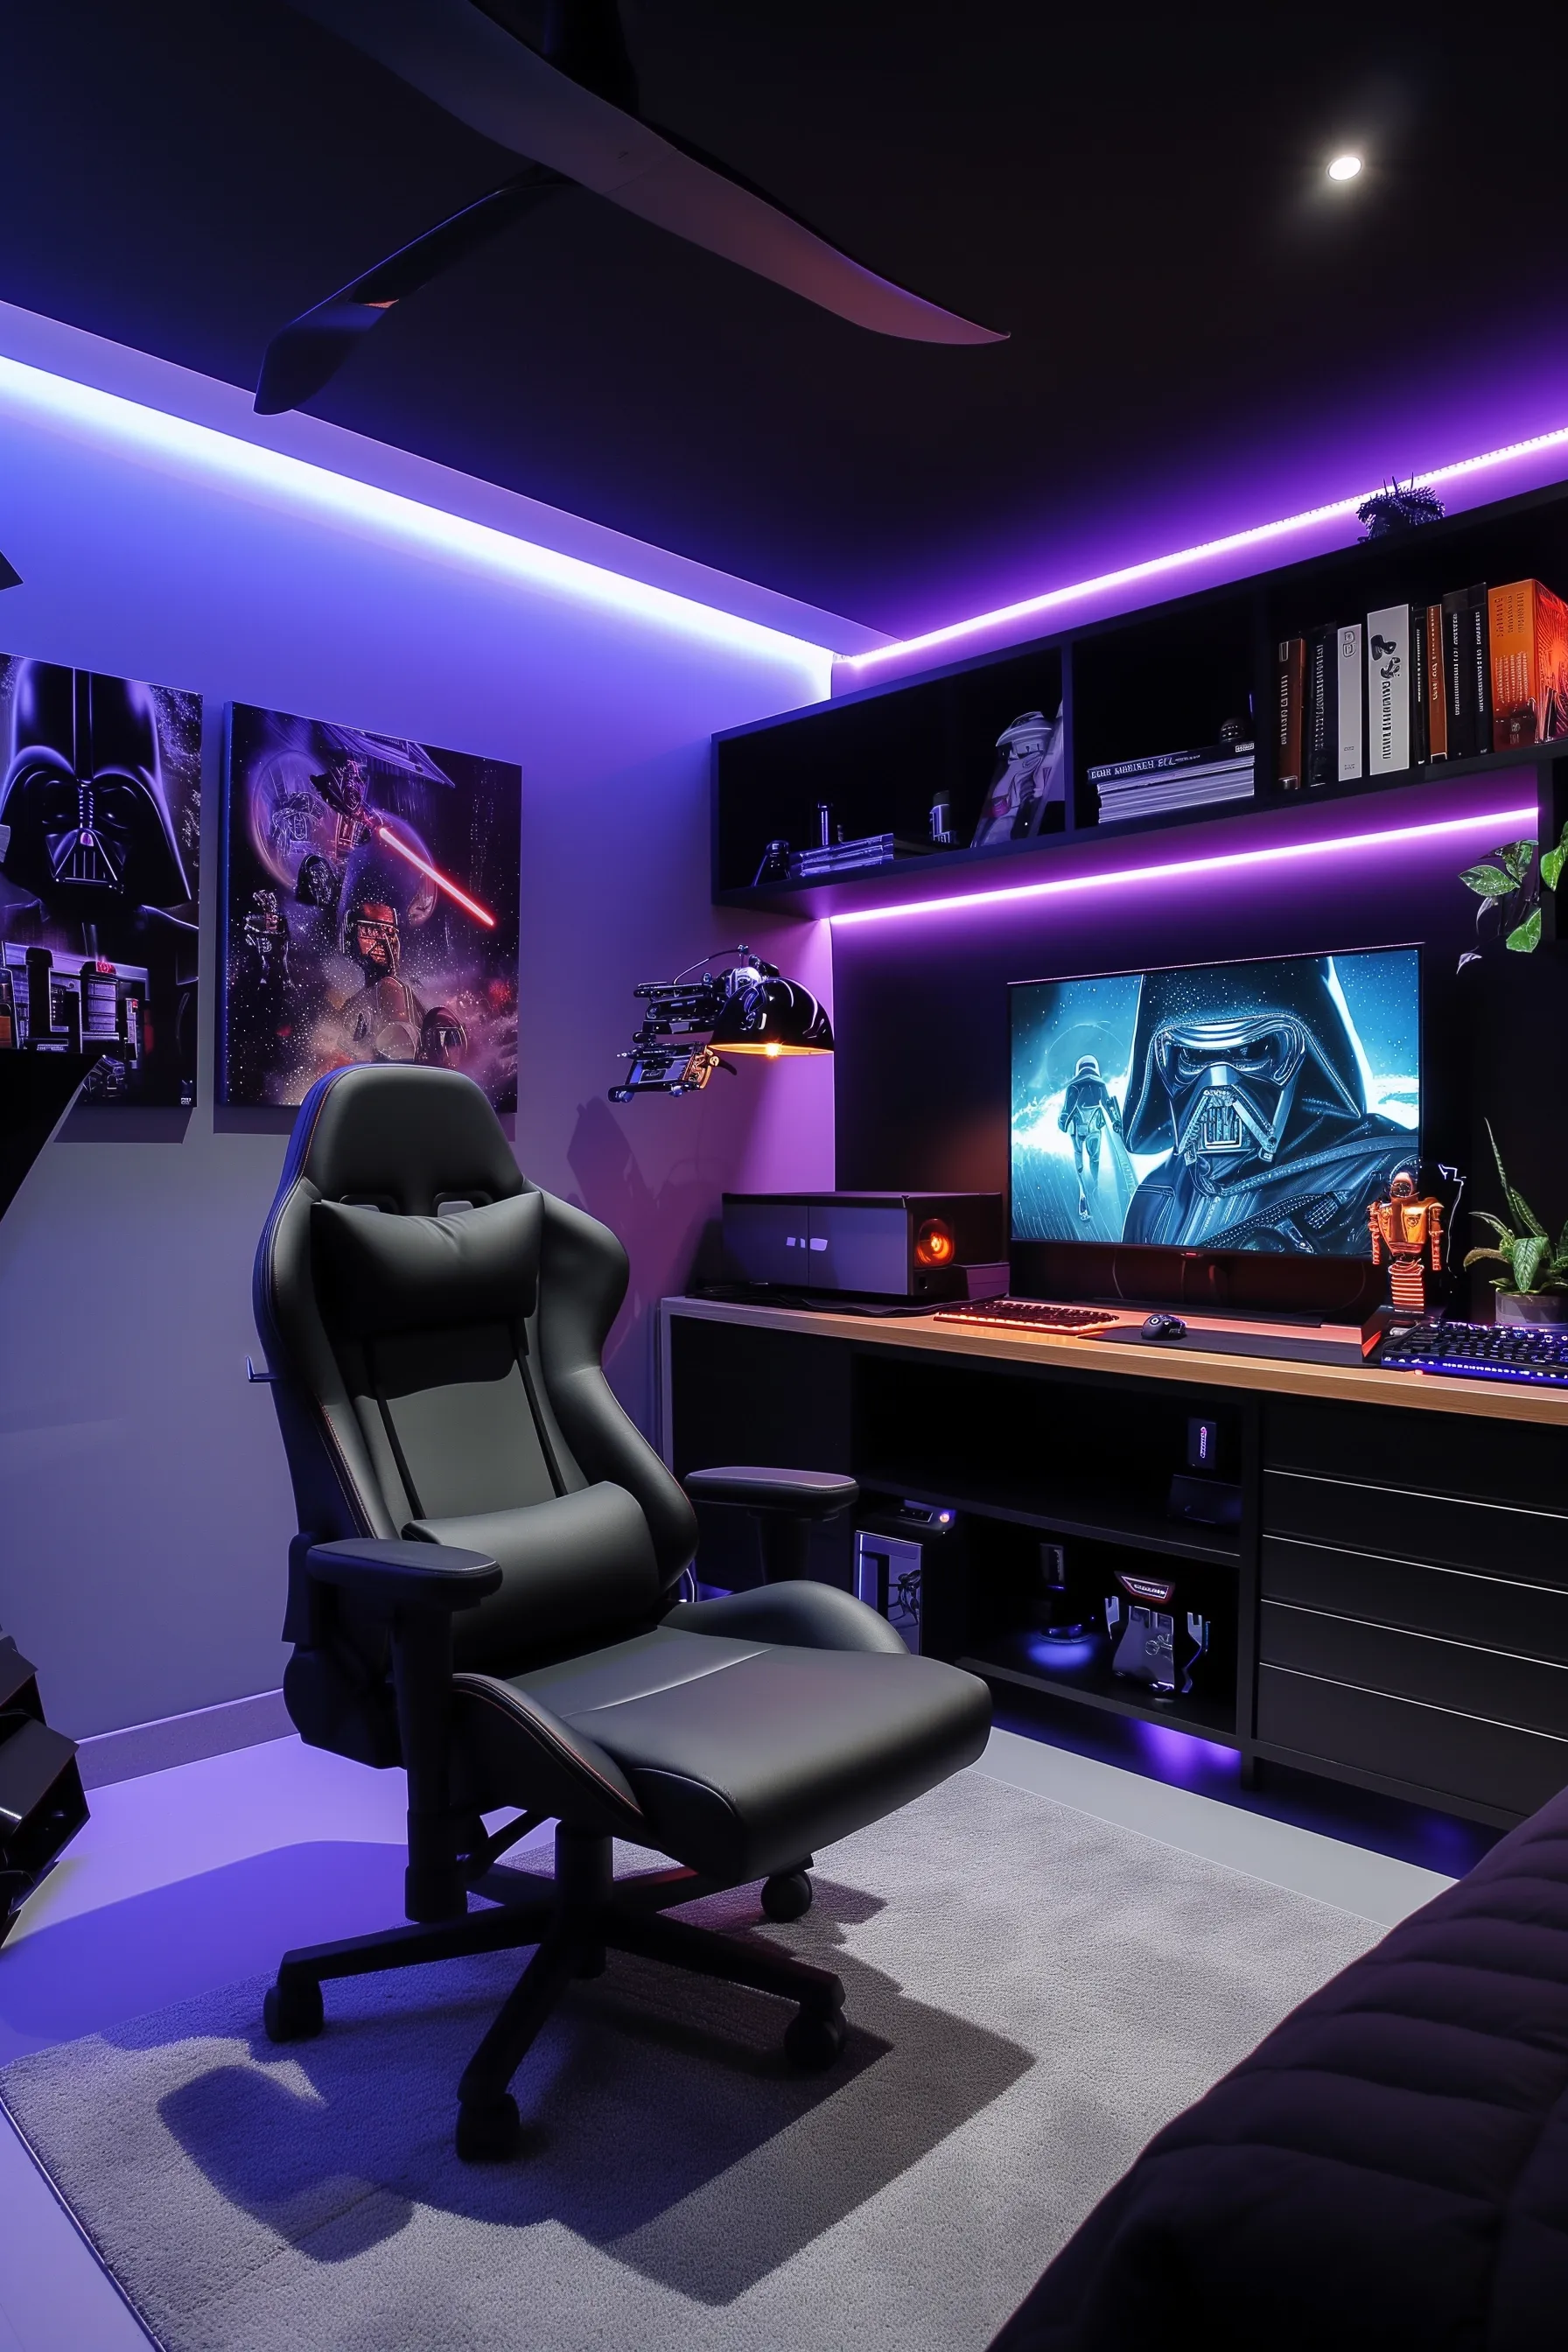 A star wars themed office space